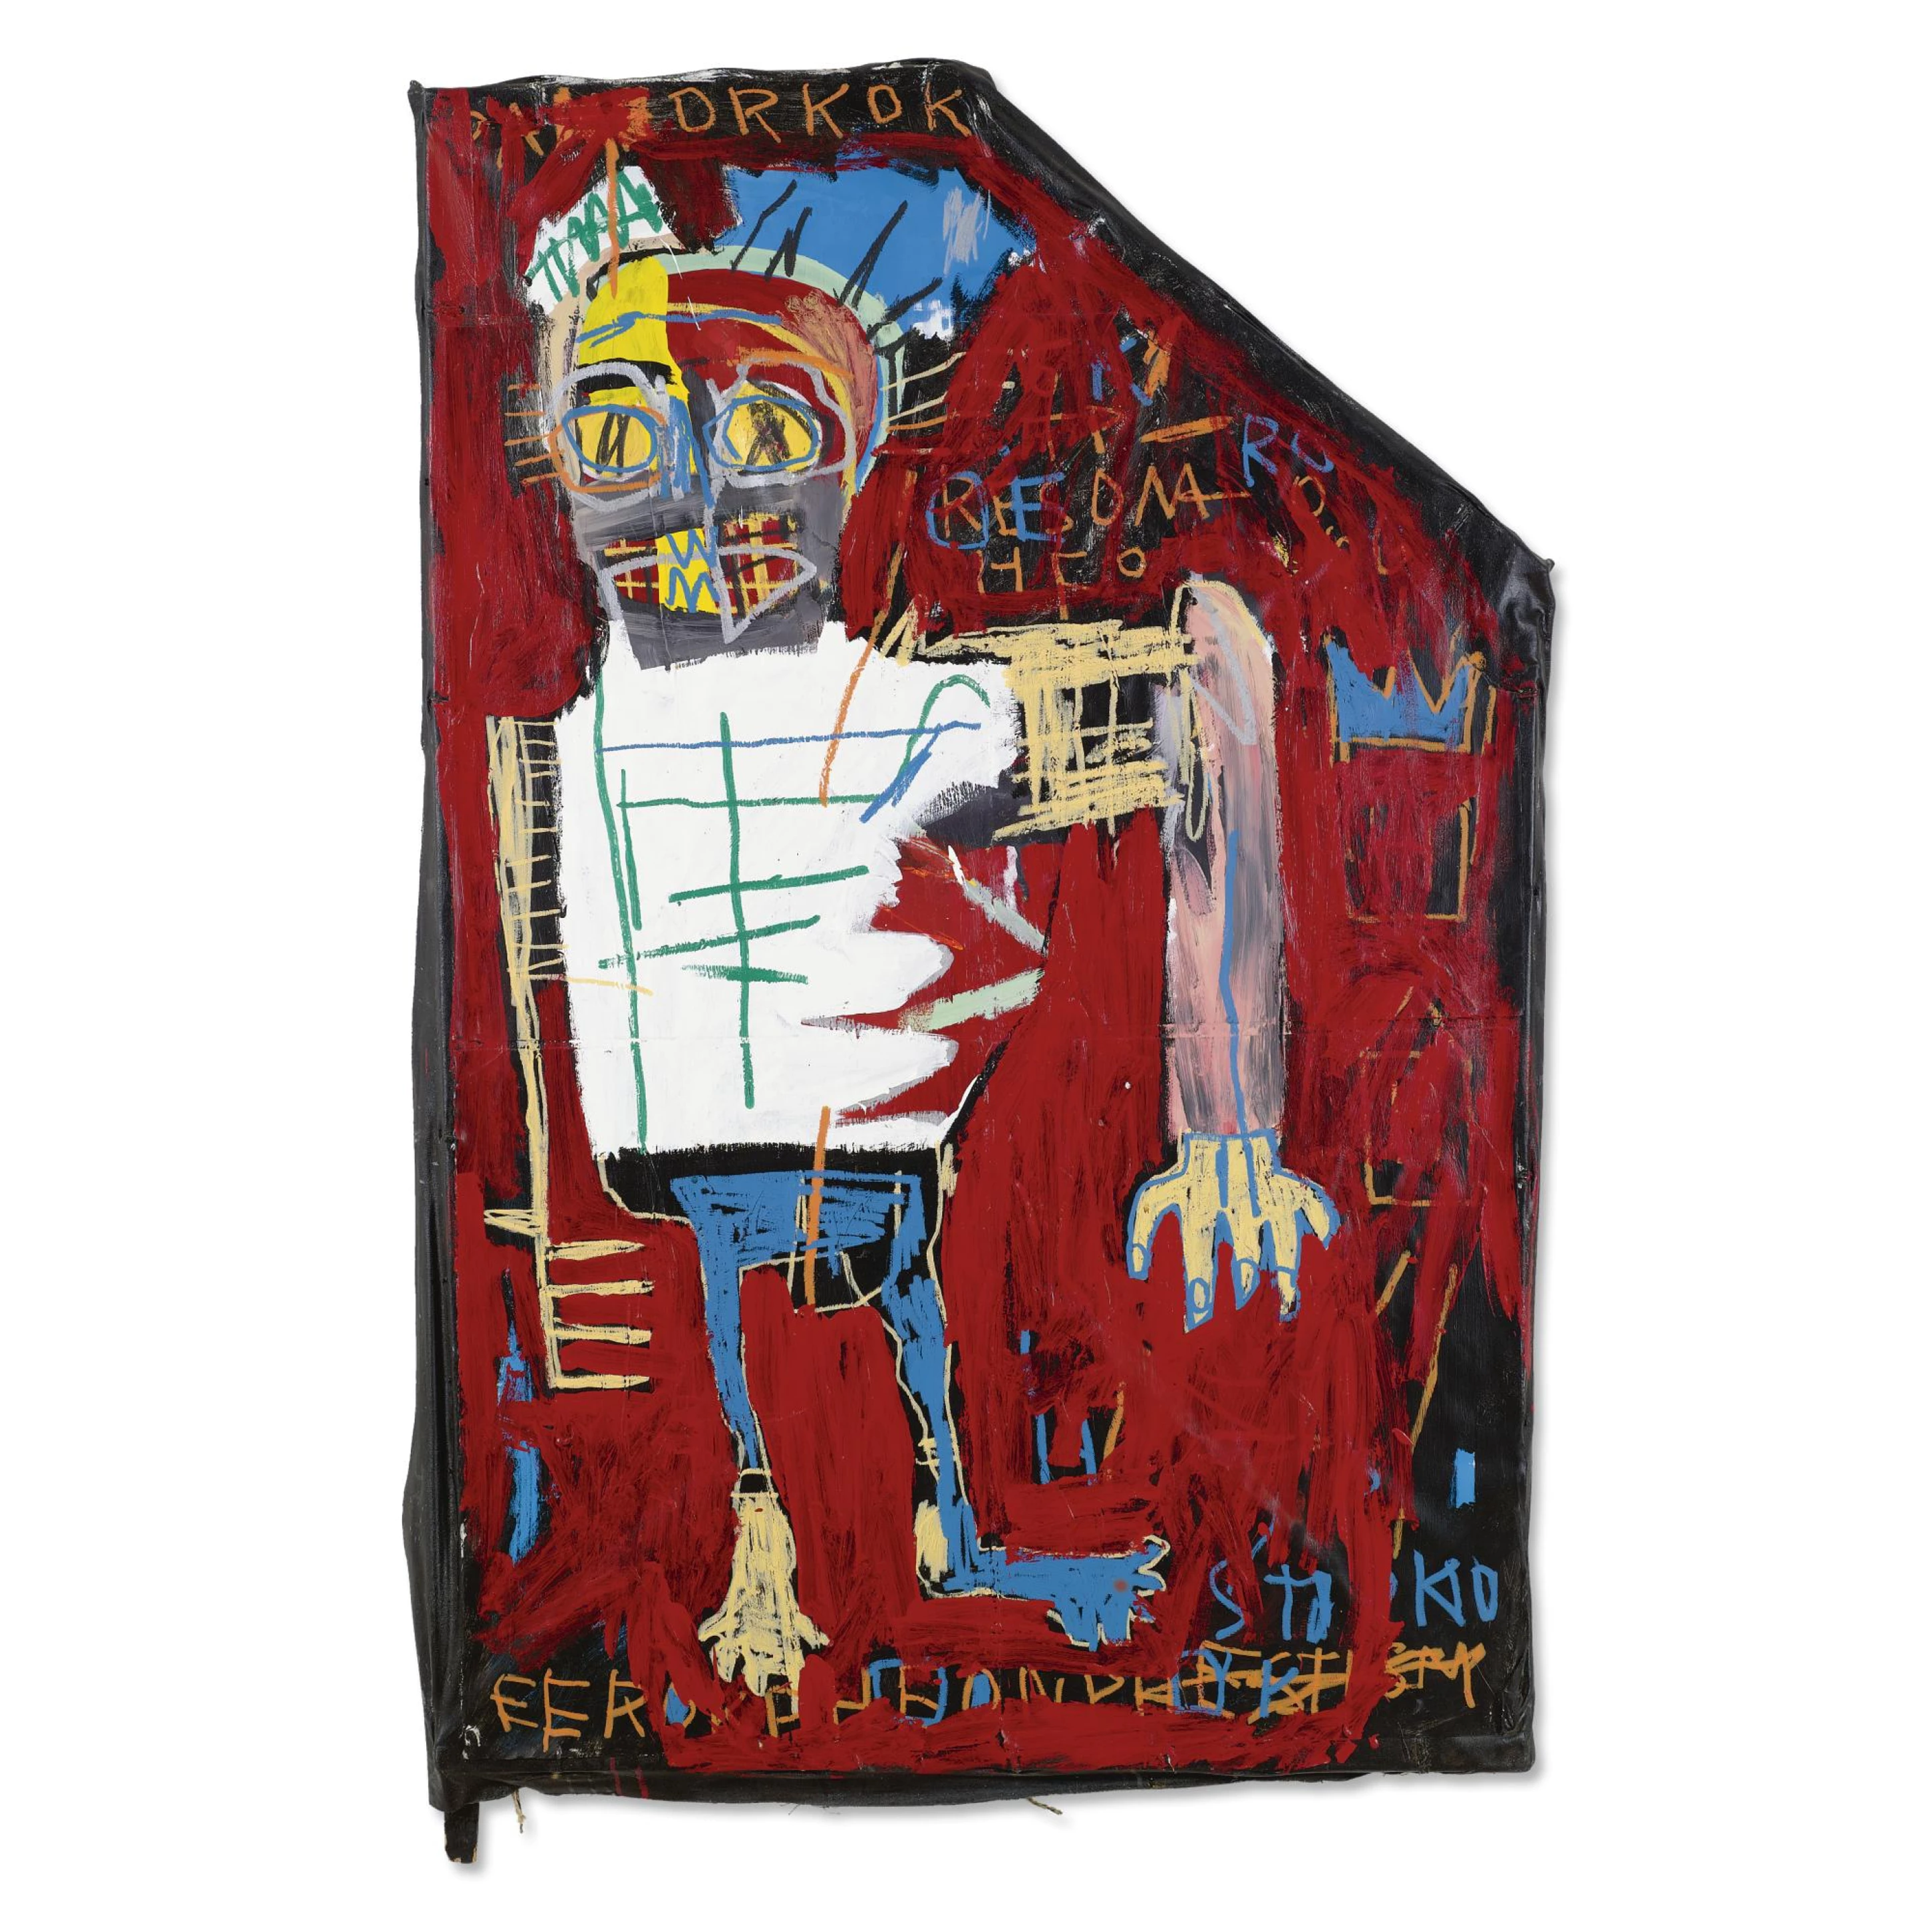 A large male figure, with an arm bent to the side, against. abright red background. He is wearing a white t-shirt and jeans. Basquiat's crown motif can be seen outlined in blue.